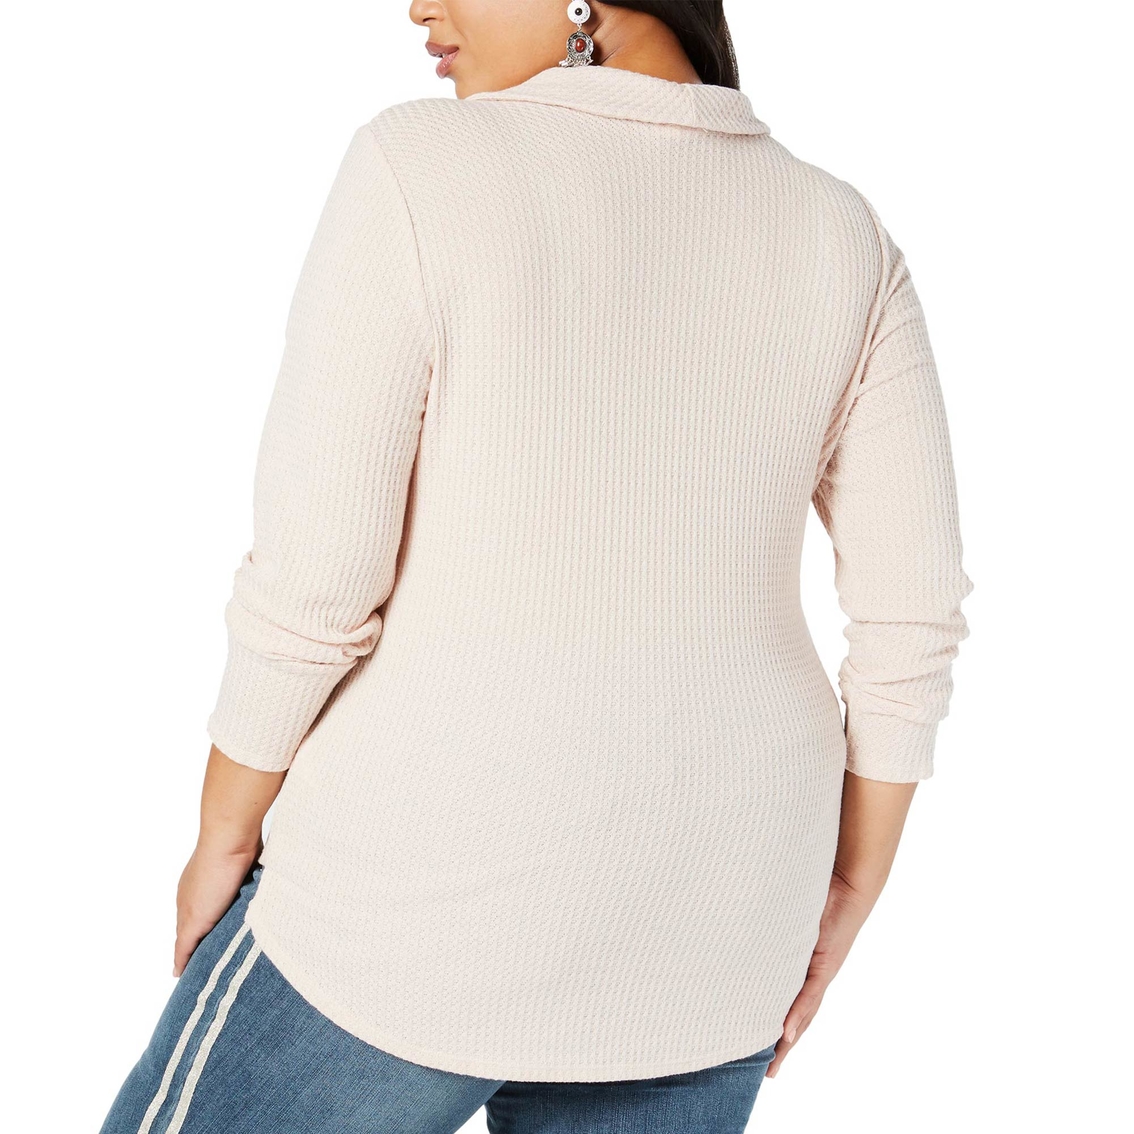 Style & Co. Plus Size Waffle Knit Cowl Neck Top - Image 2 of 2